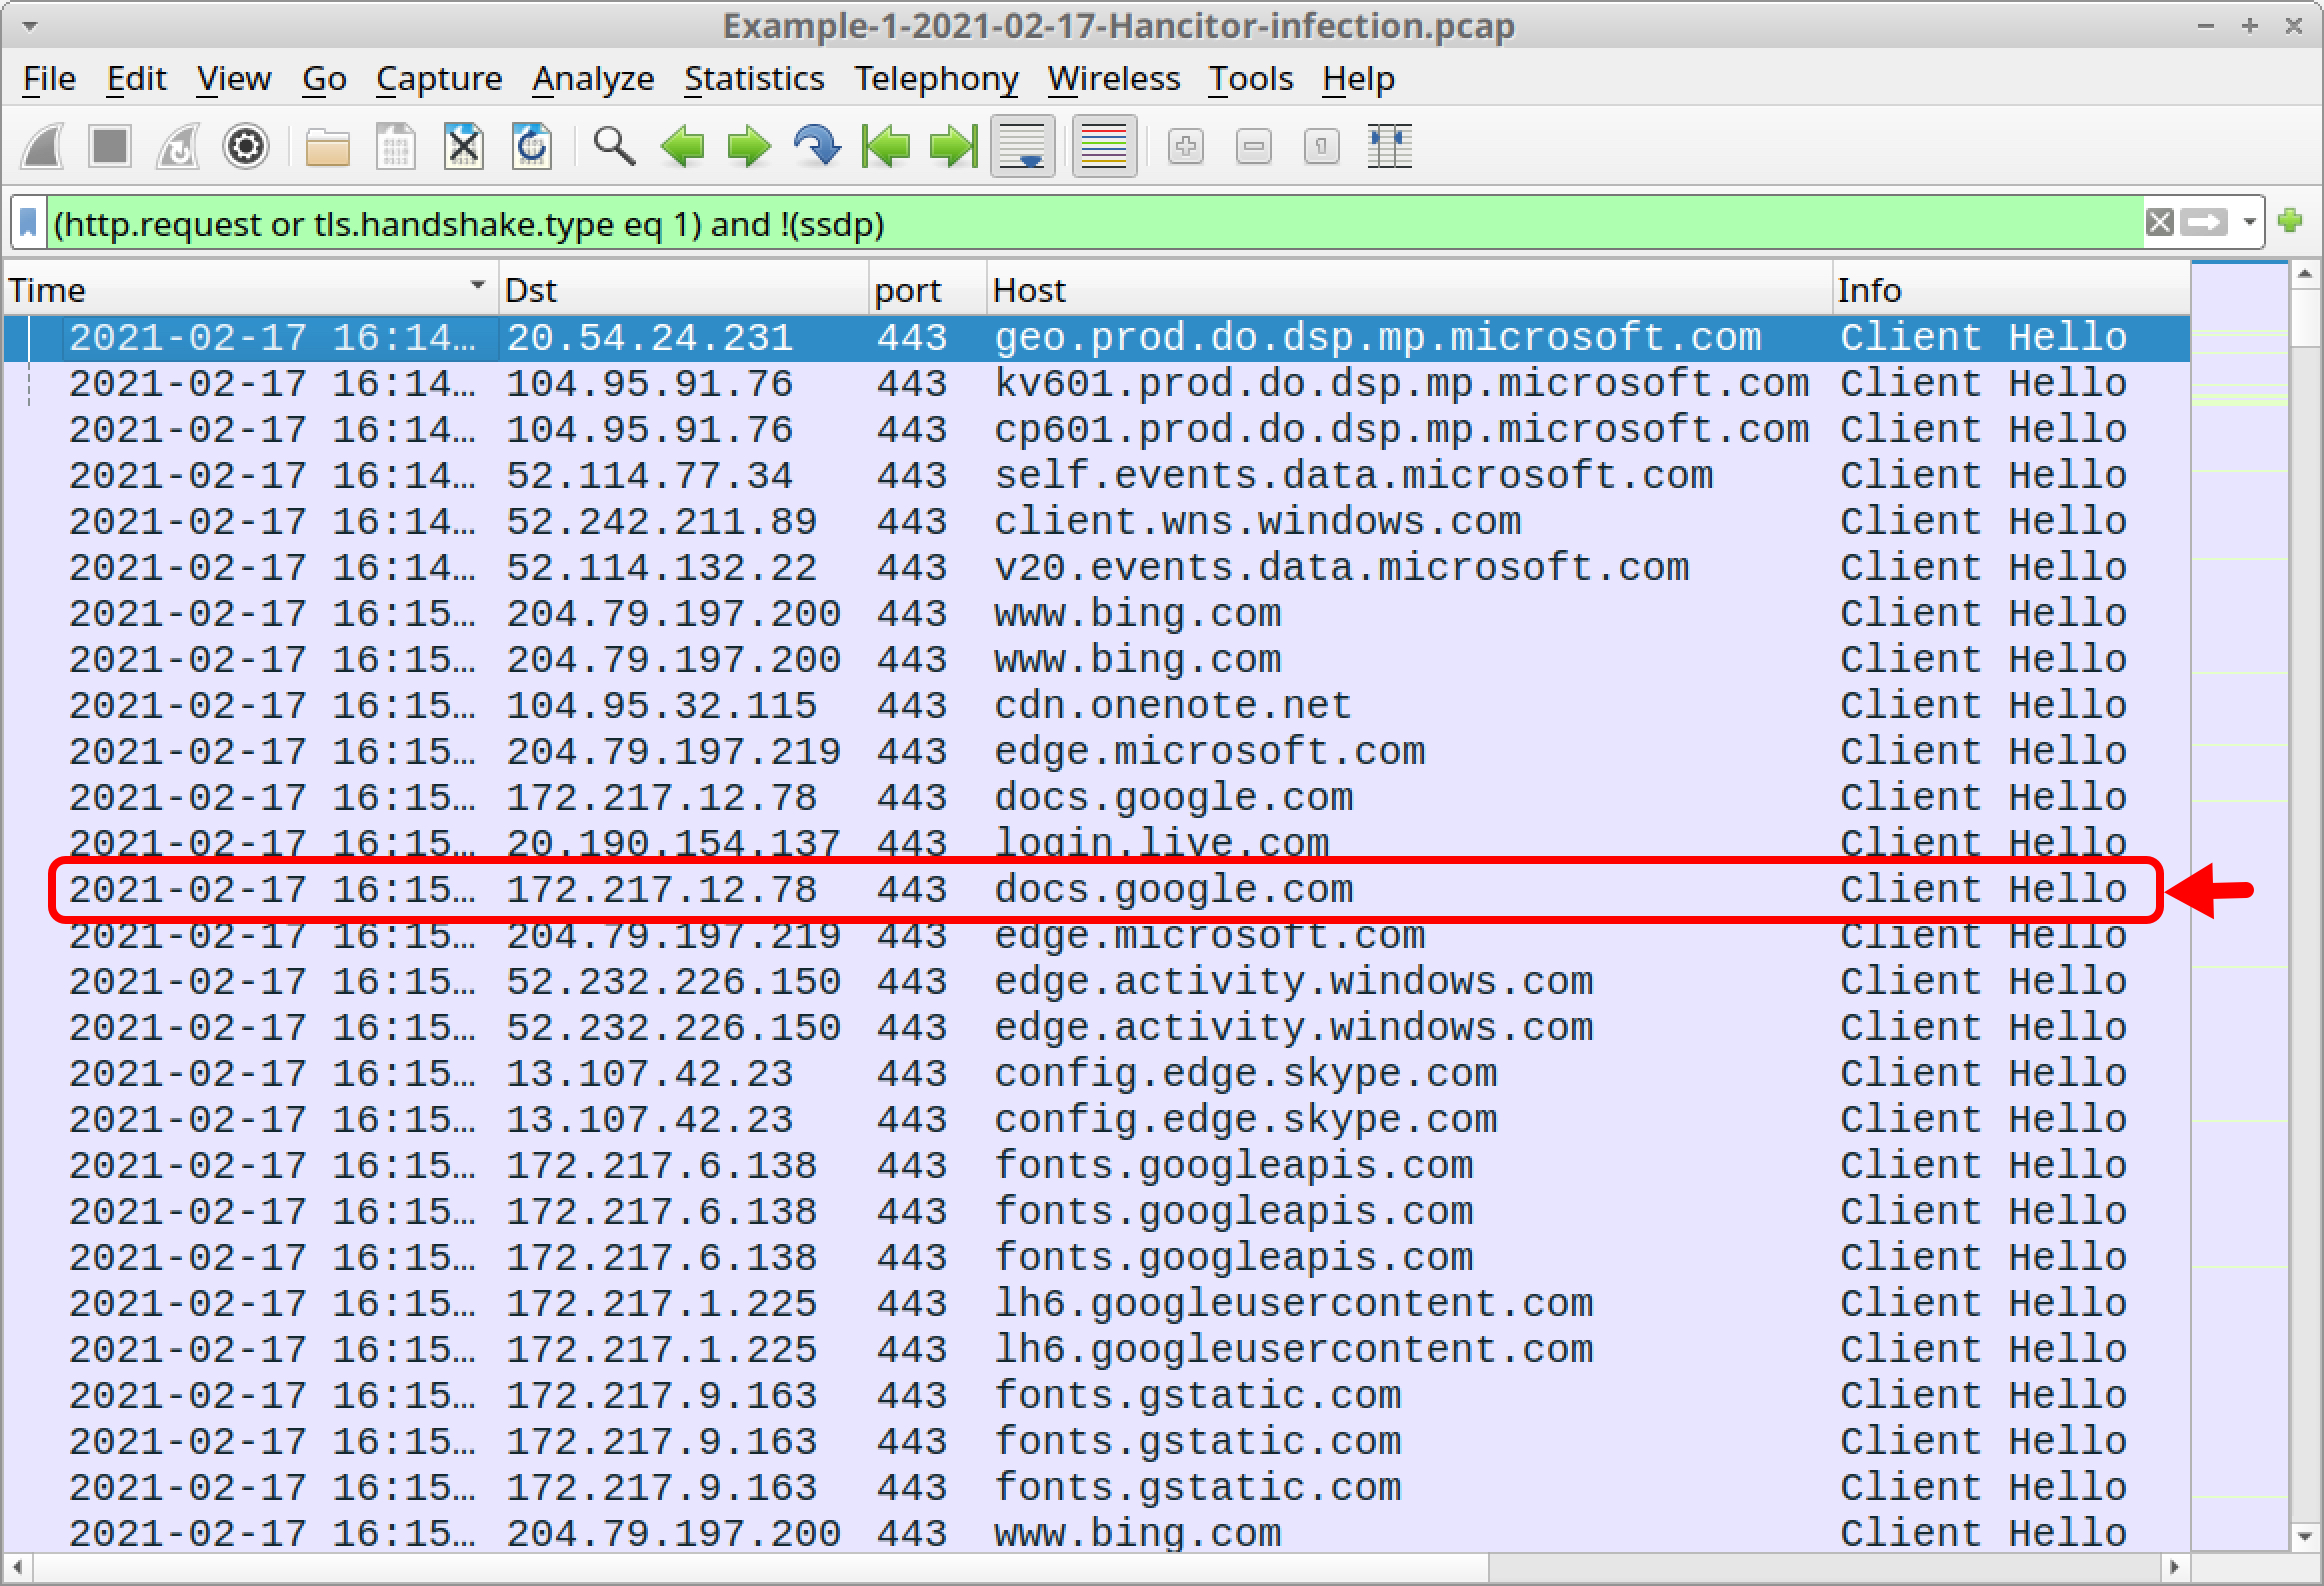 A red box indicates the line that shows HTTPS traffic to docs.google.com in the pcap. 